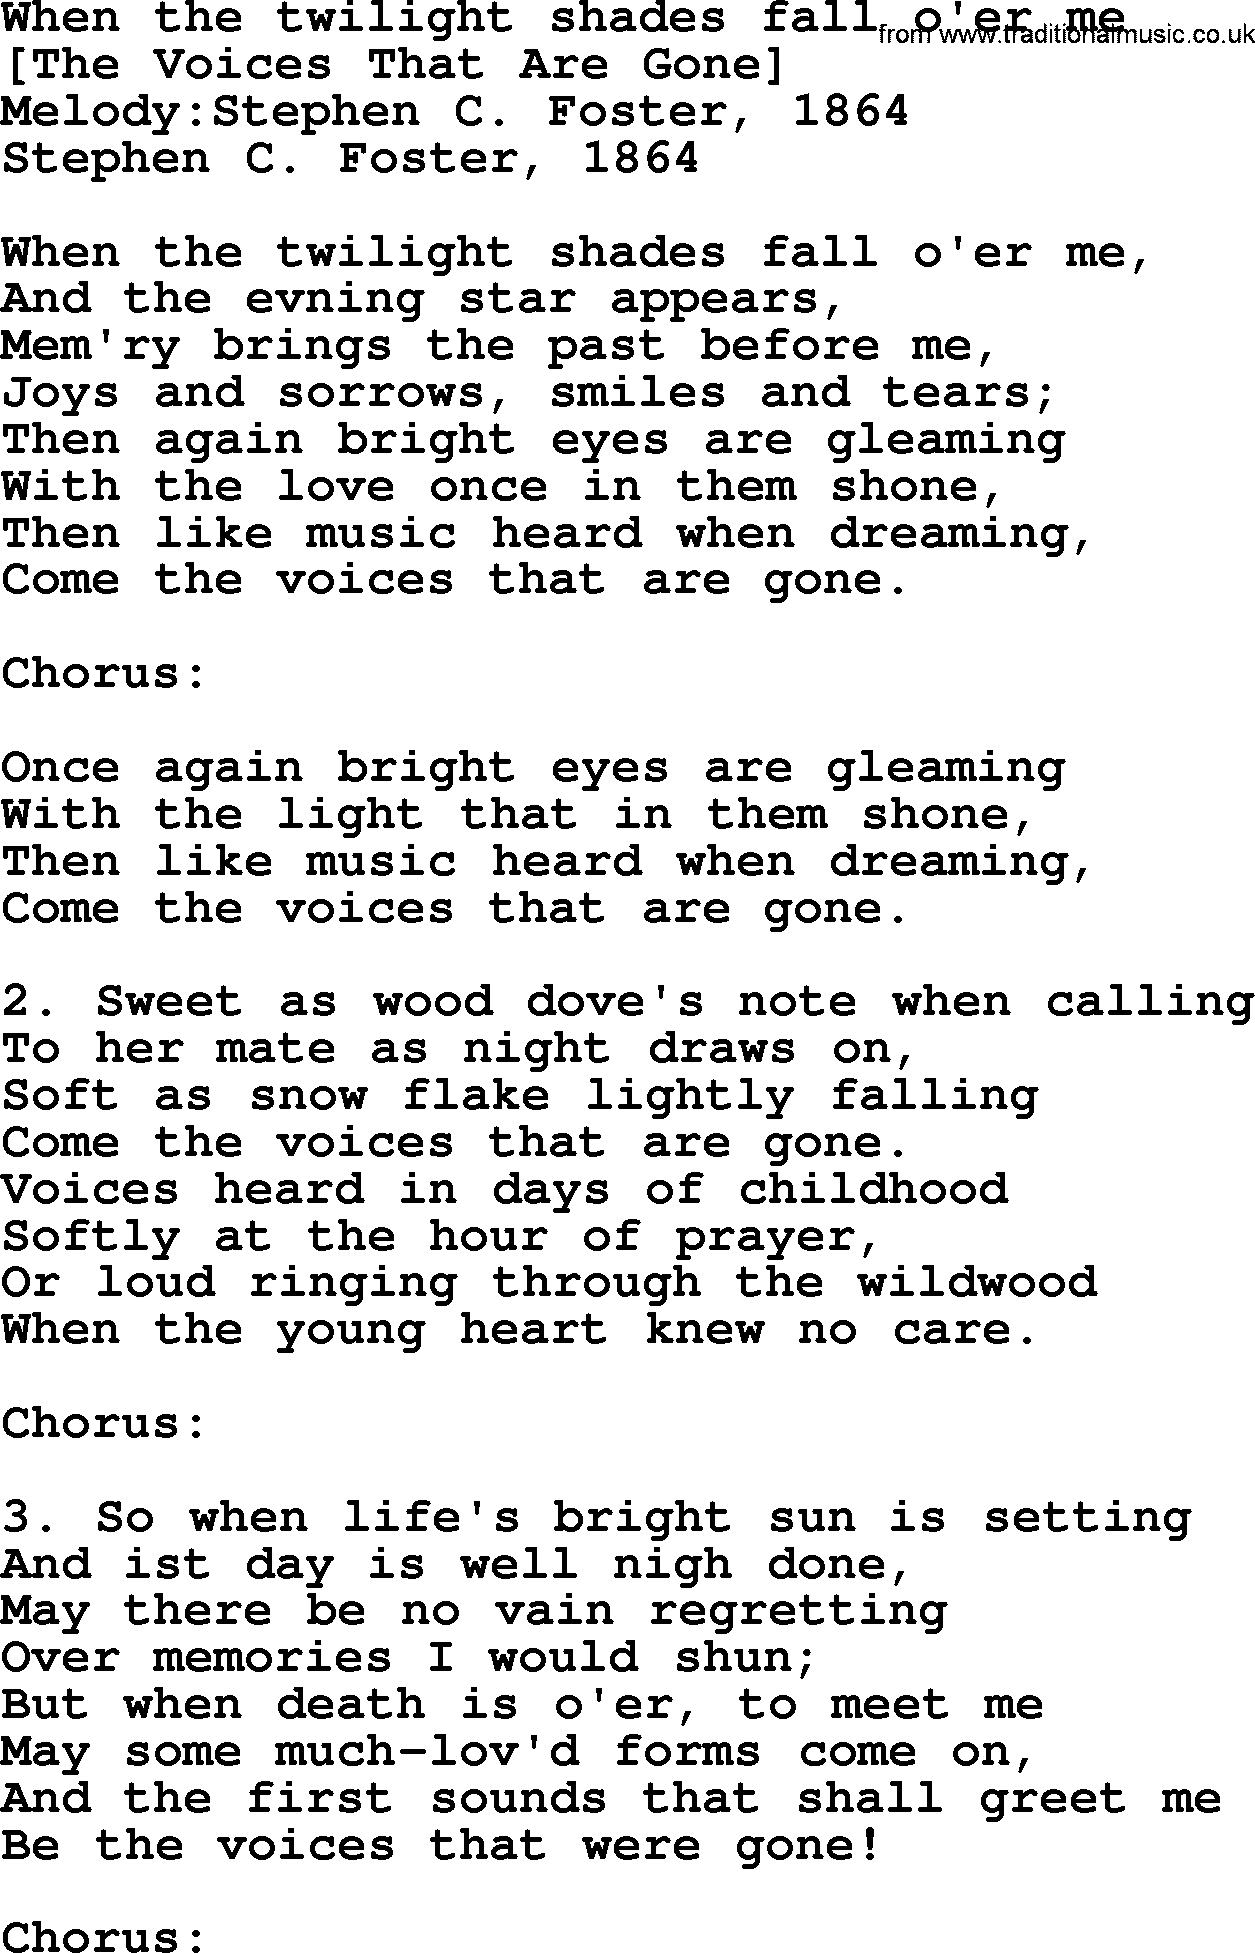 Old American Song: When The Twilight Shades Fall O'er Me, lyrics